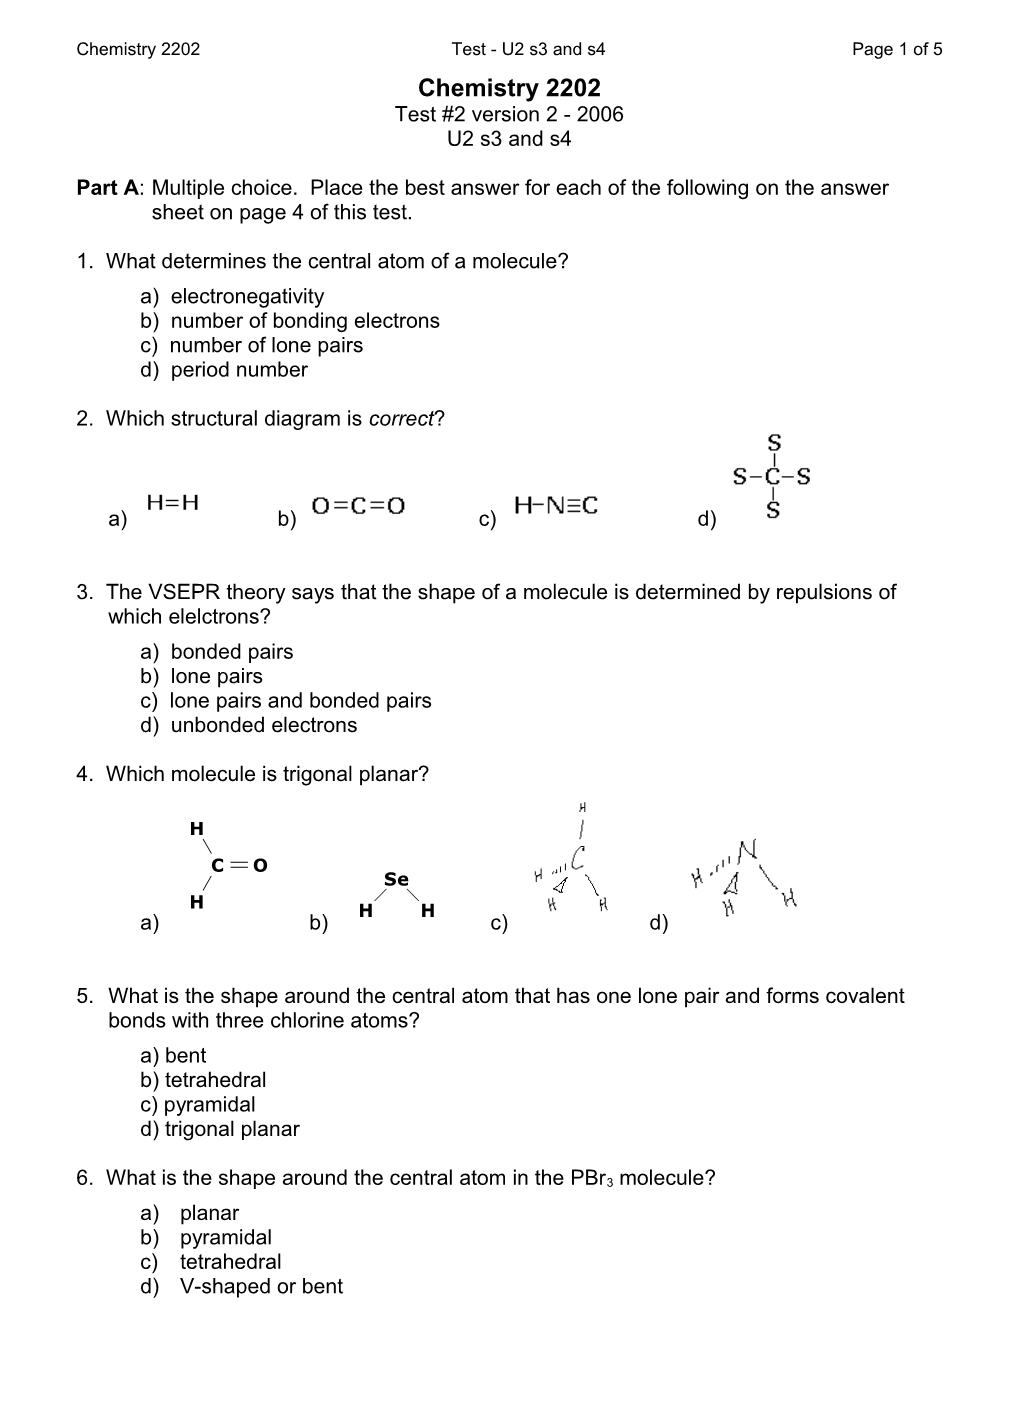 Chemistry 2202 Test - U2 S3 and S4 Page 3 of 5